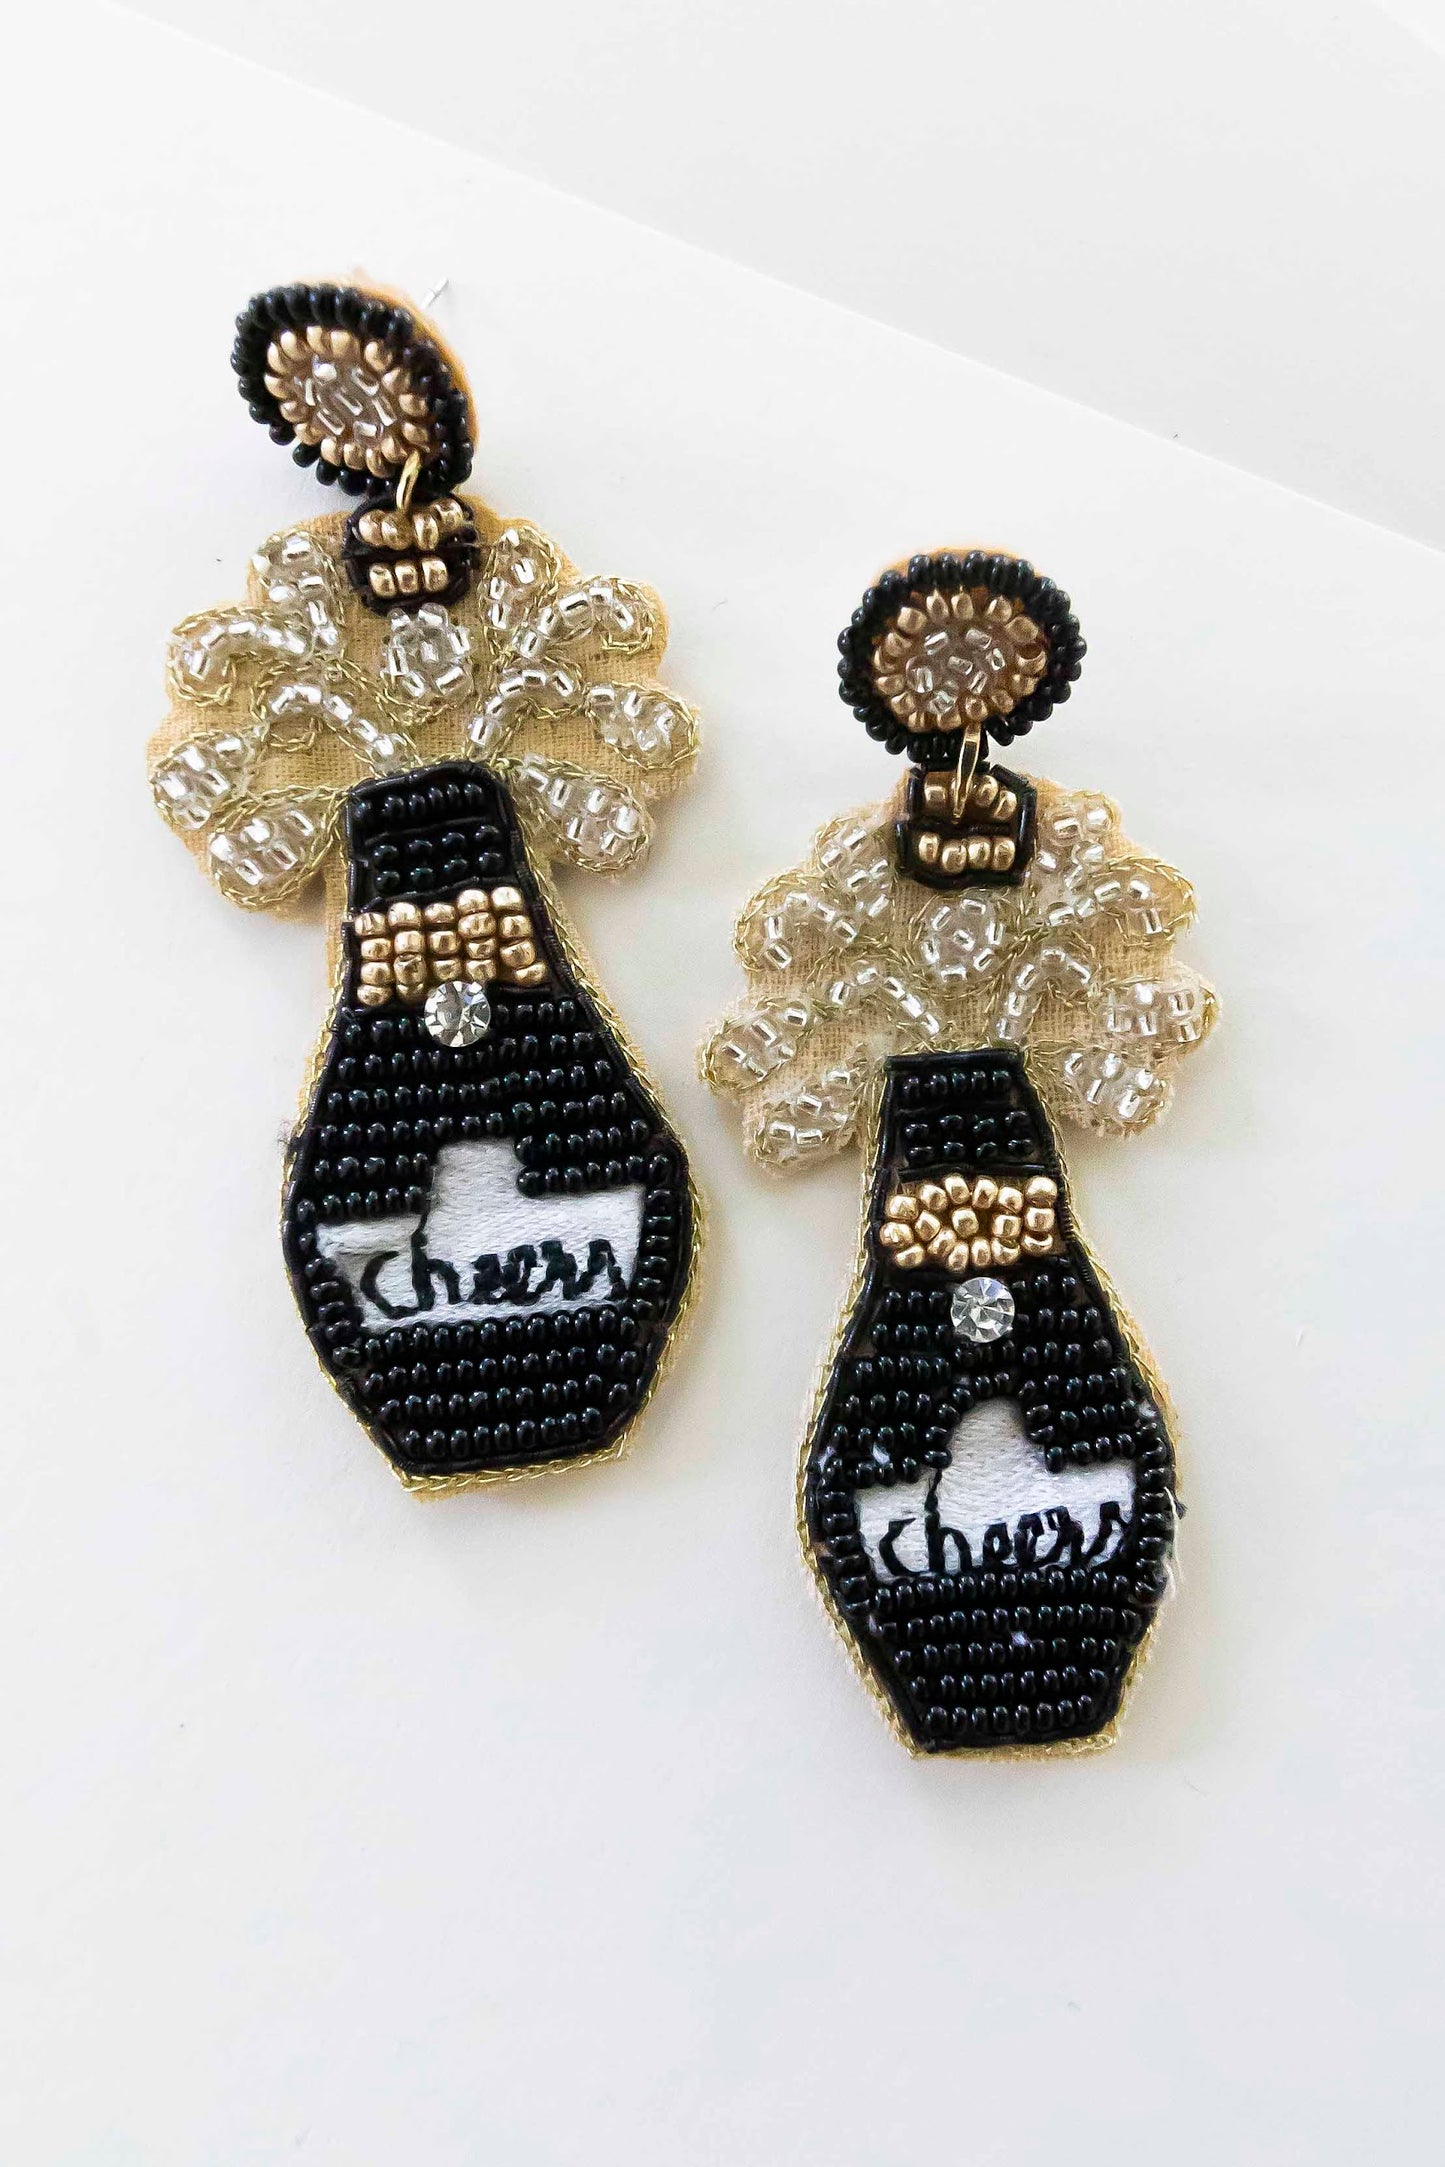 Cheers Black Champagne Earrings | Hand Beaded Party Earrings | Handmade New Years Earrings | Dainty Black and Gold Beads with Embroidery Detail